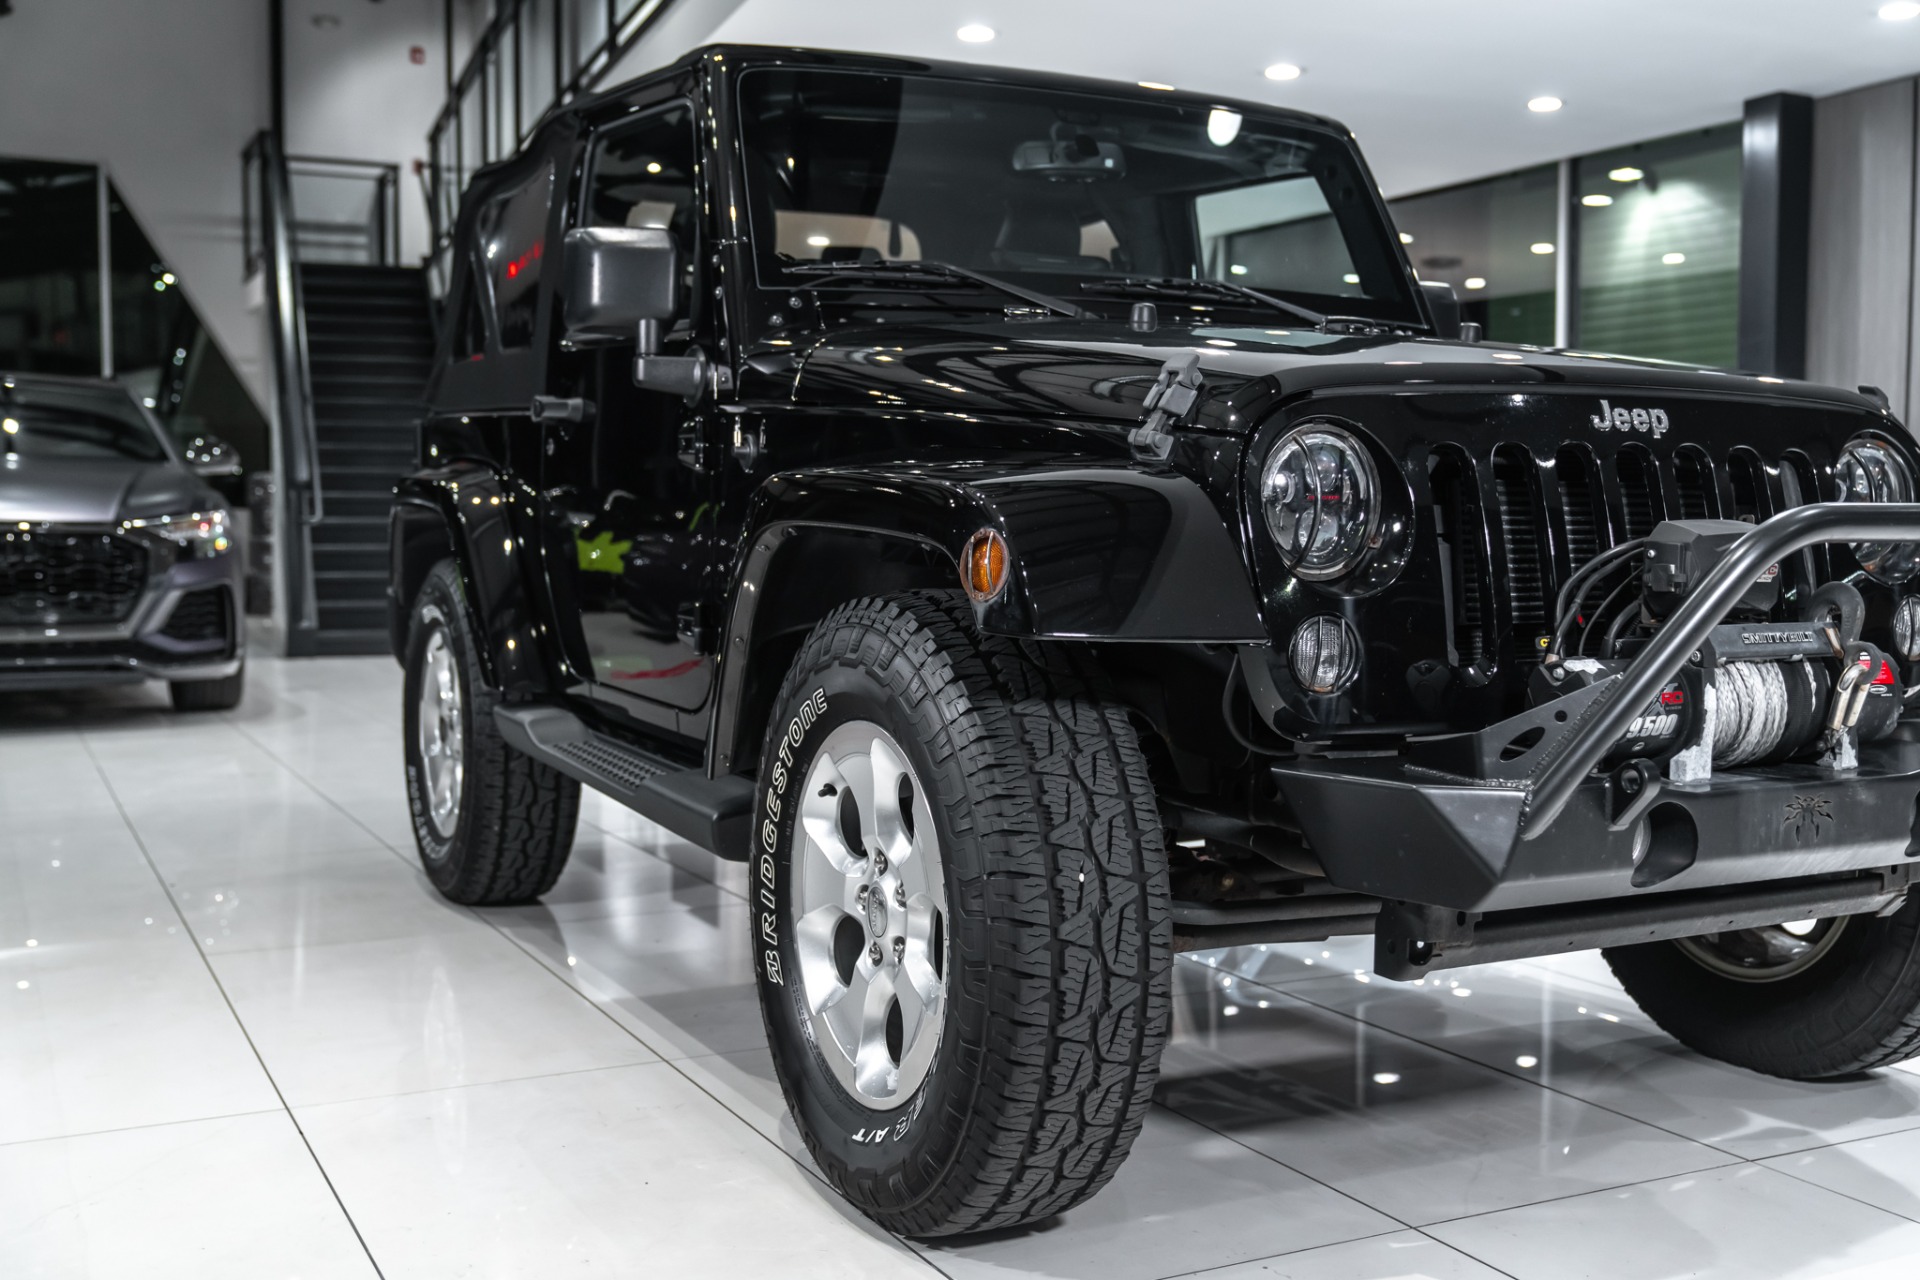 Used-2015-Jeep-Wrangler-Sahara-4x4-SUV-Heated-Front-Seats-Stinger-Head-Unit-Well-Equipped